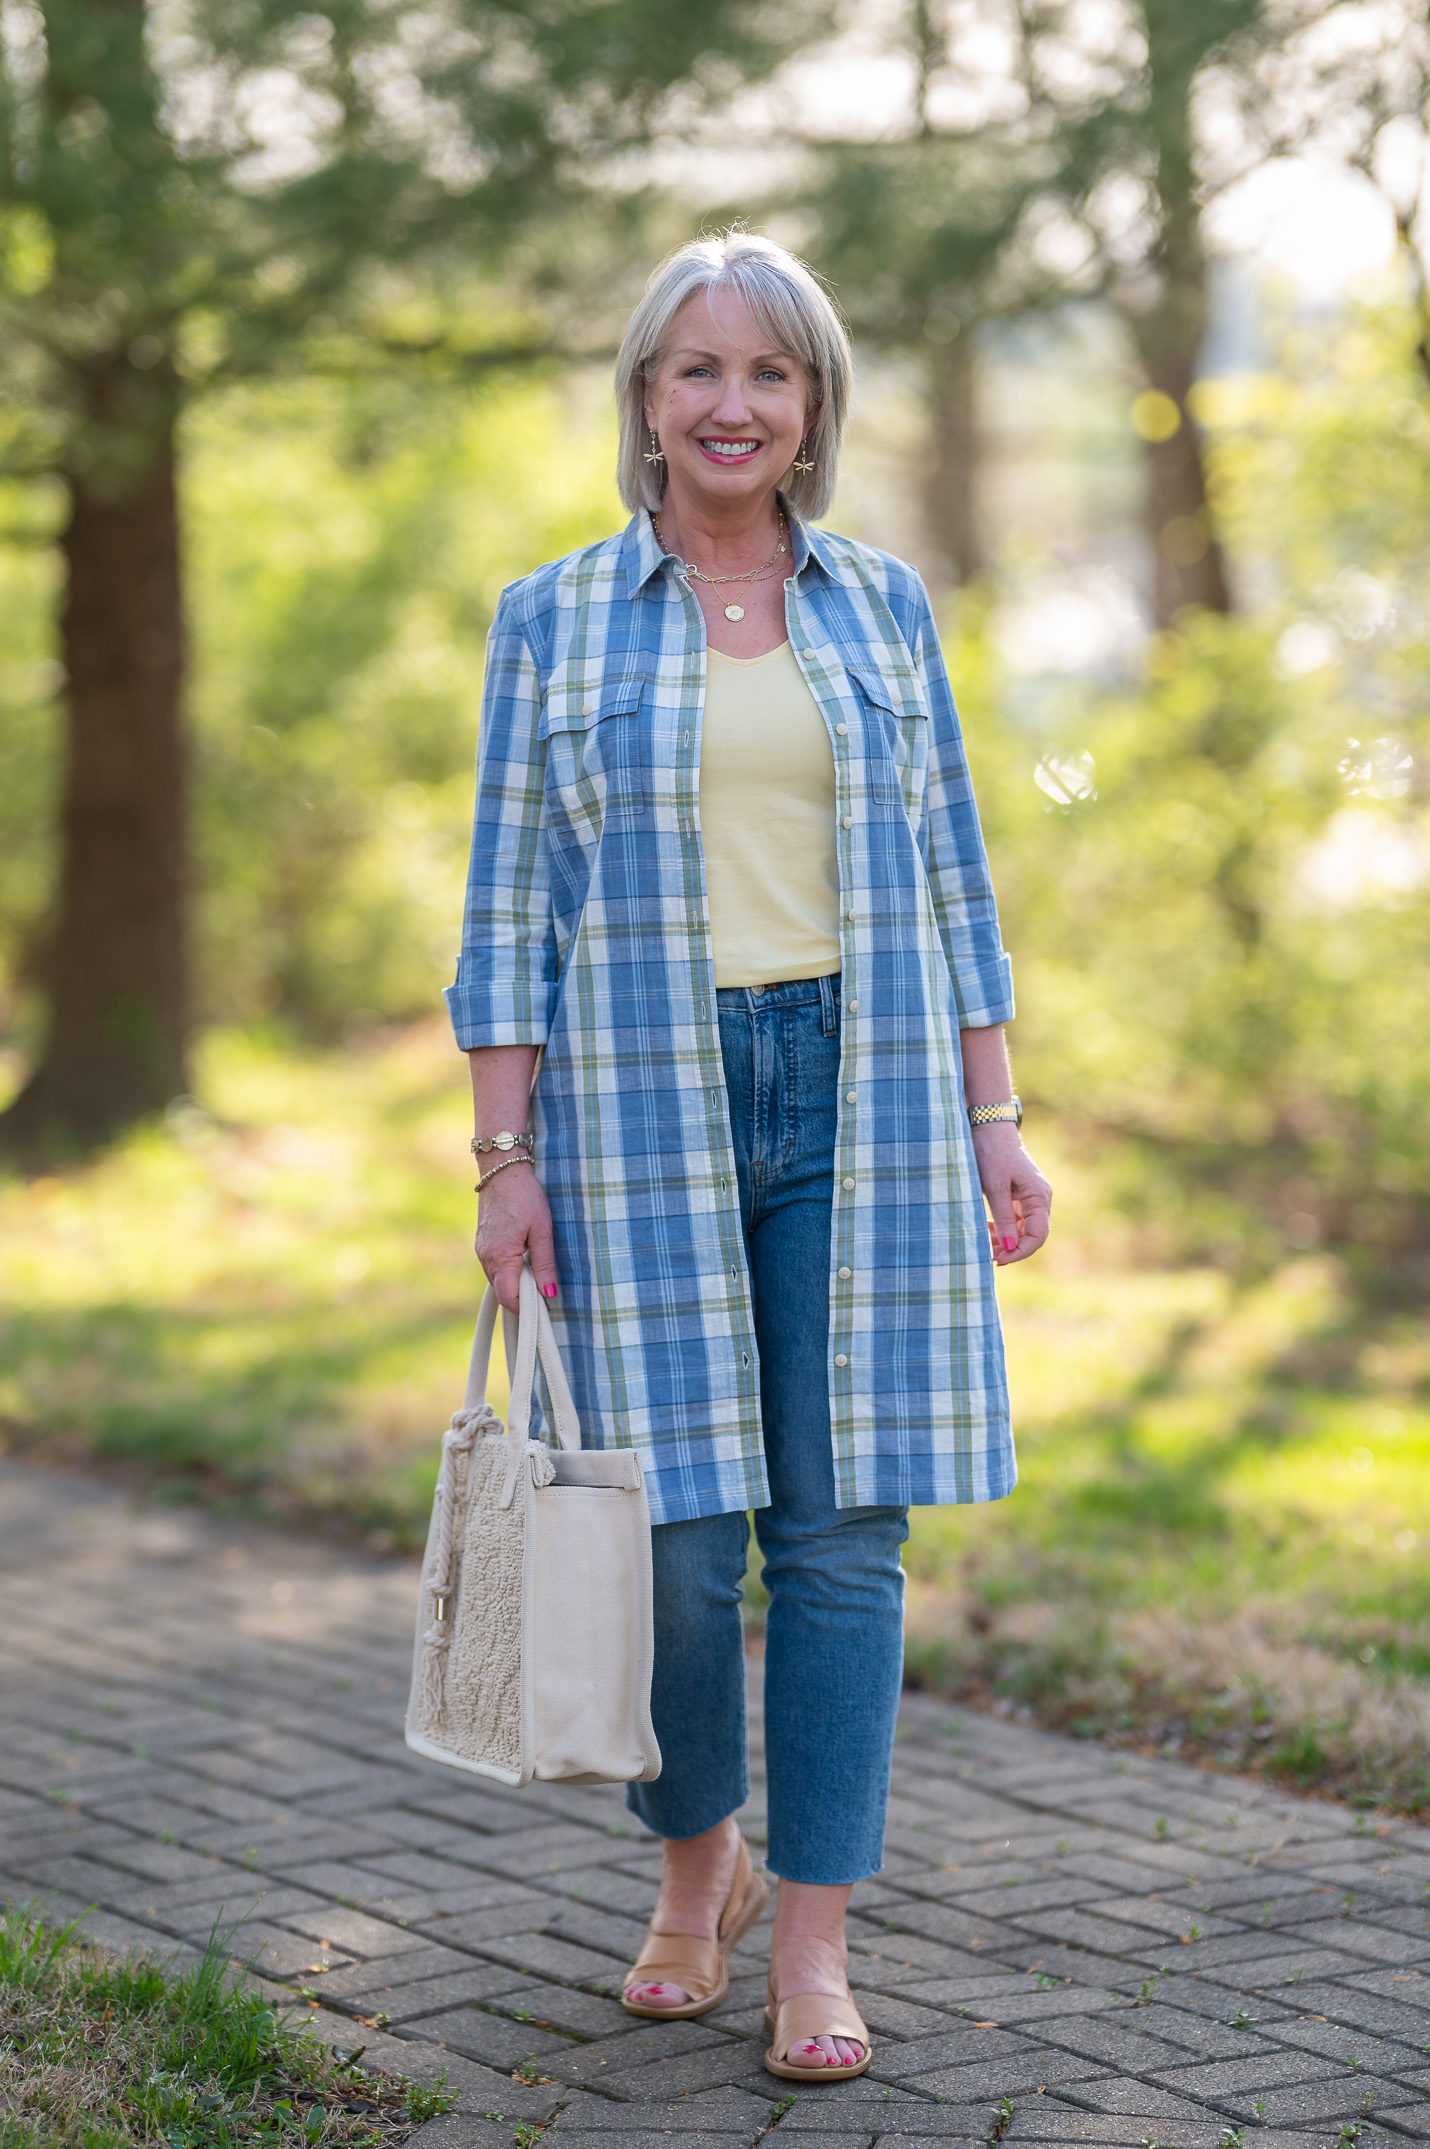 Shirtdress with Jeans and Tank